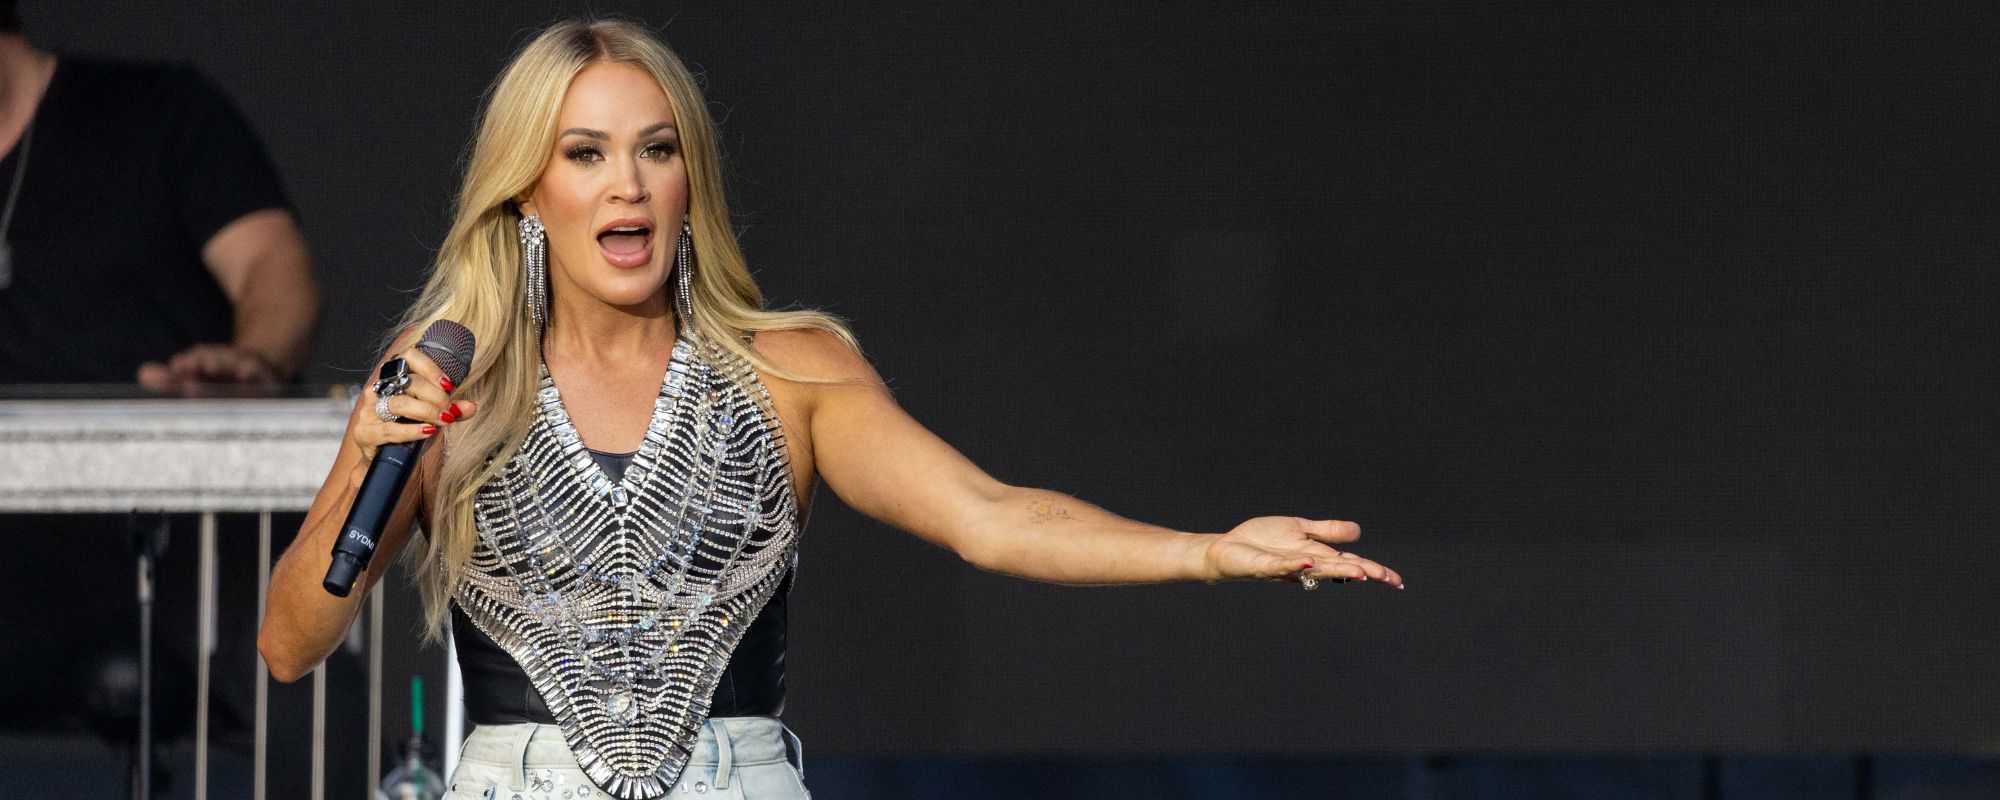 Outraged Carrie Underwood Fans Wonder Why This No. 1 Hit Didn’t Make the ‘Twisters’ Soundtrack